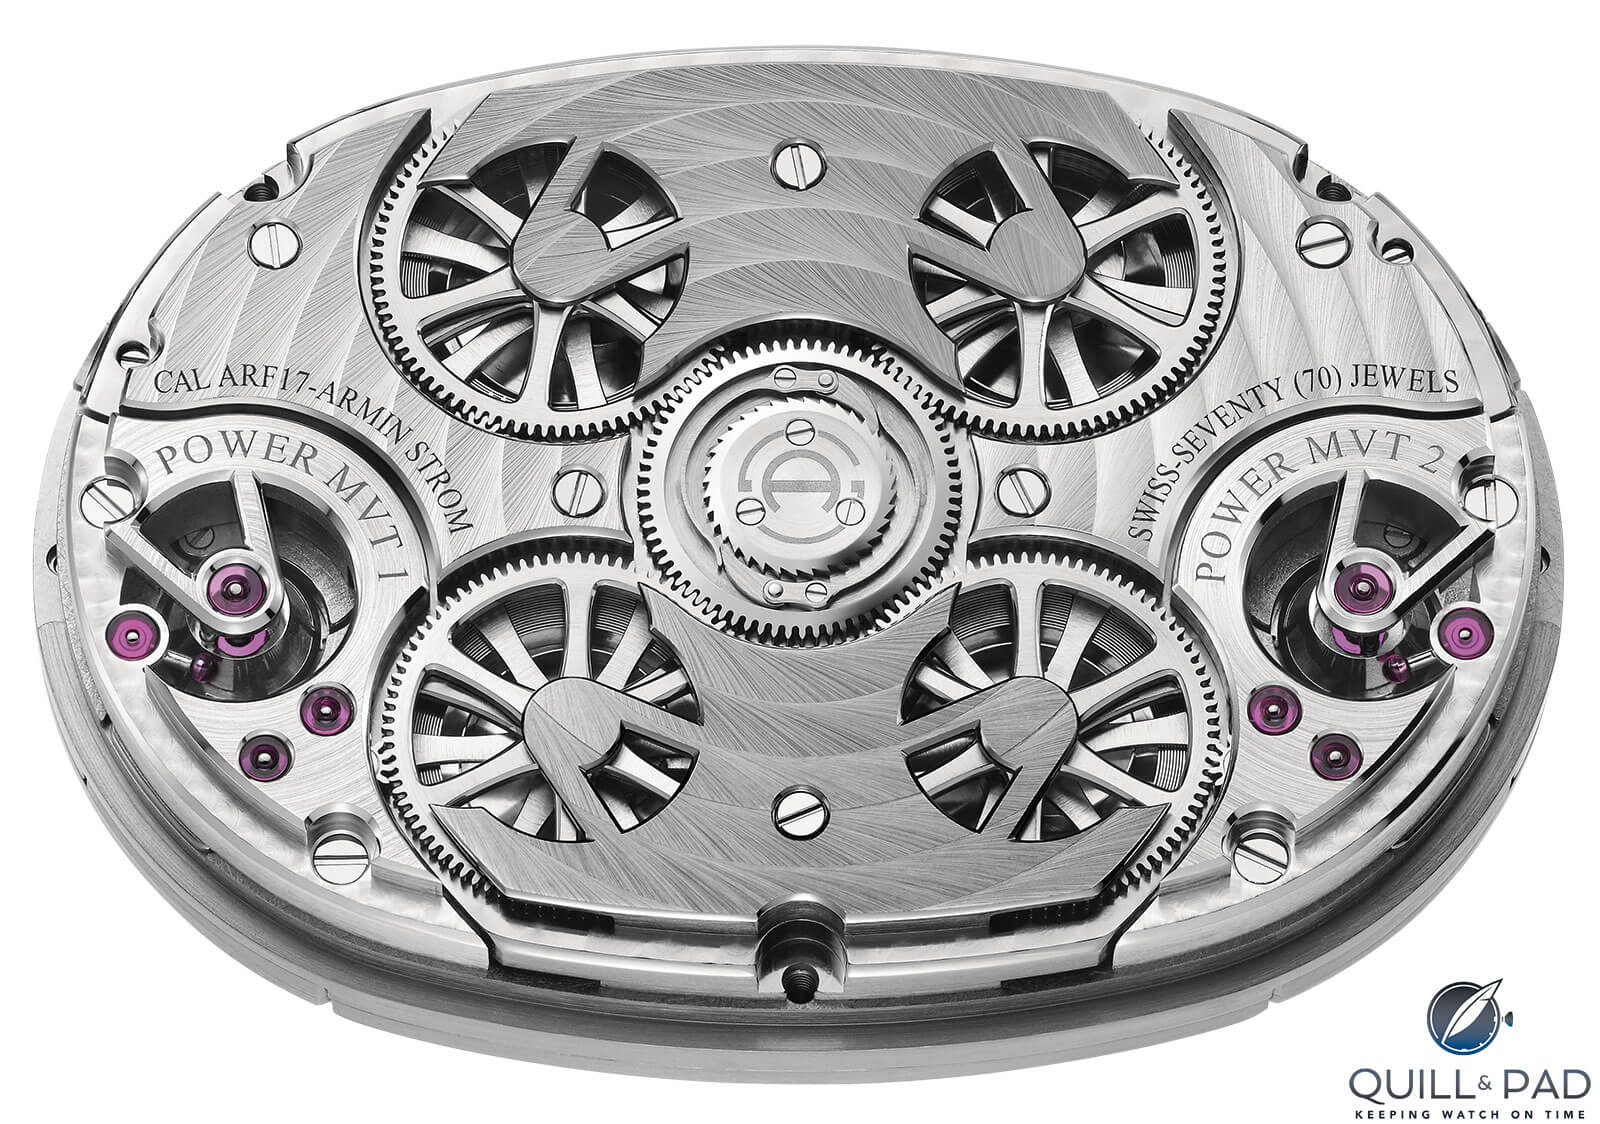 Armin Strom Dual Time Resonance Caliber ARF17 movment side with the four mainspring barrels - two for each movement - are on full display through skeletonized covers